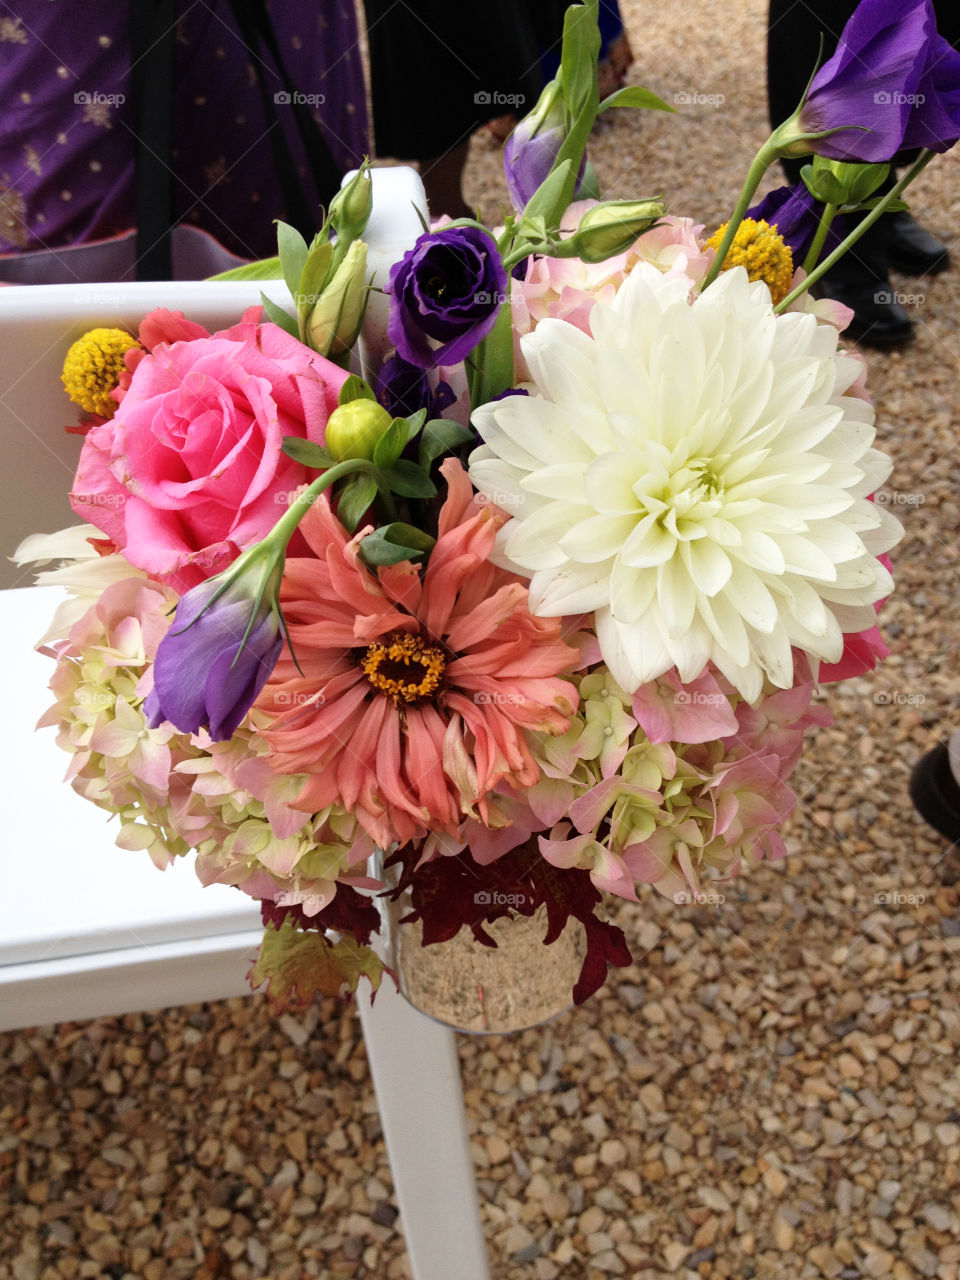 Bouquet of flowers decorating an event chair at an outdoor wedding